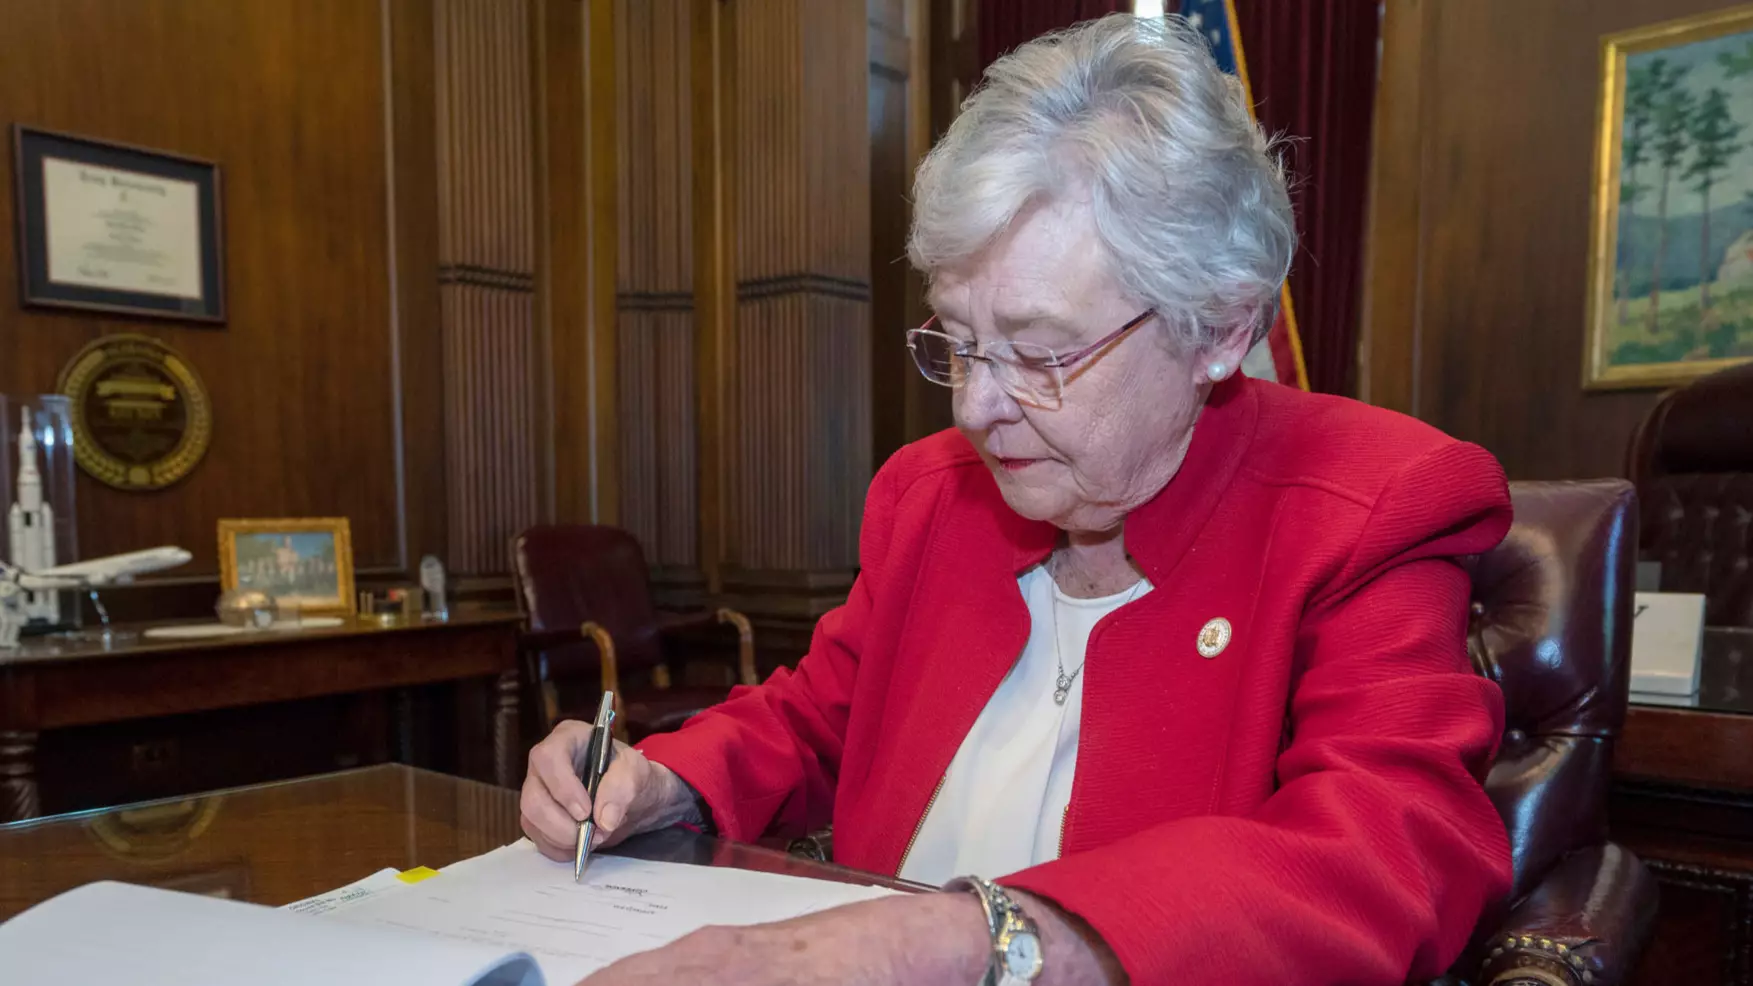 Alabama Governor Signs America's Strictest Ban On Abortion